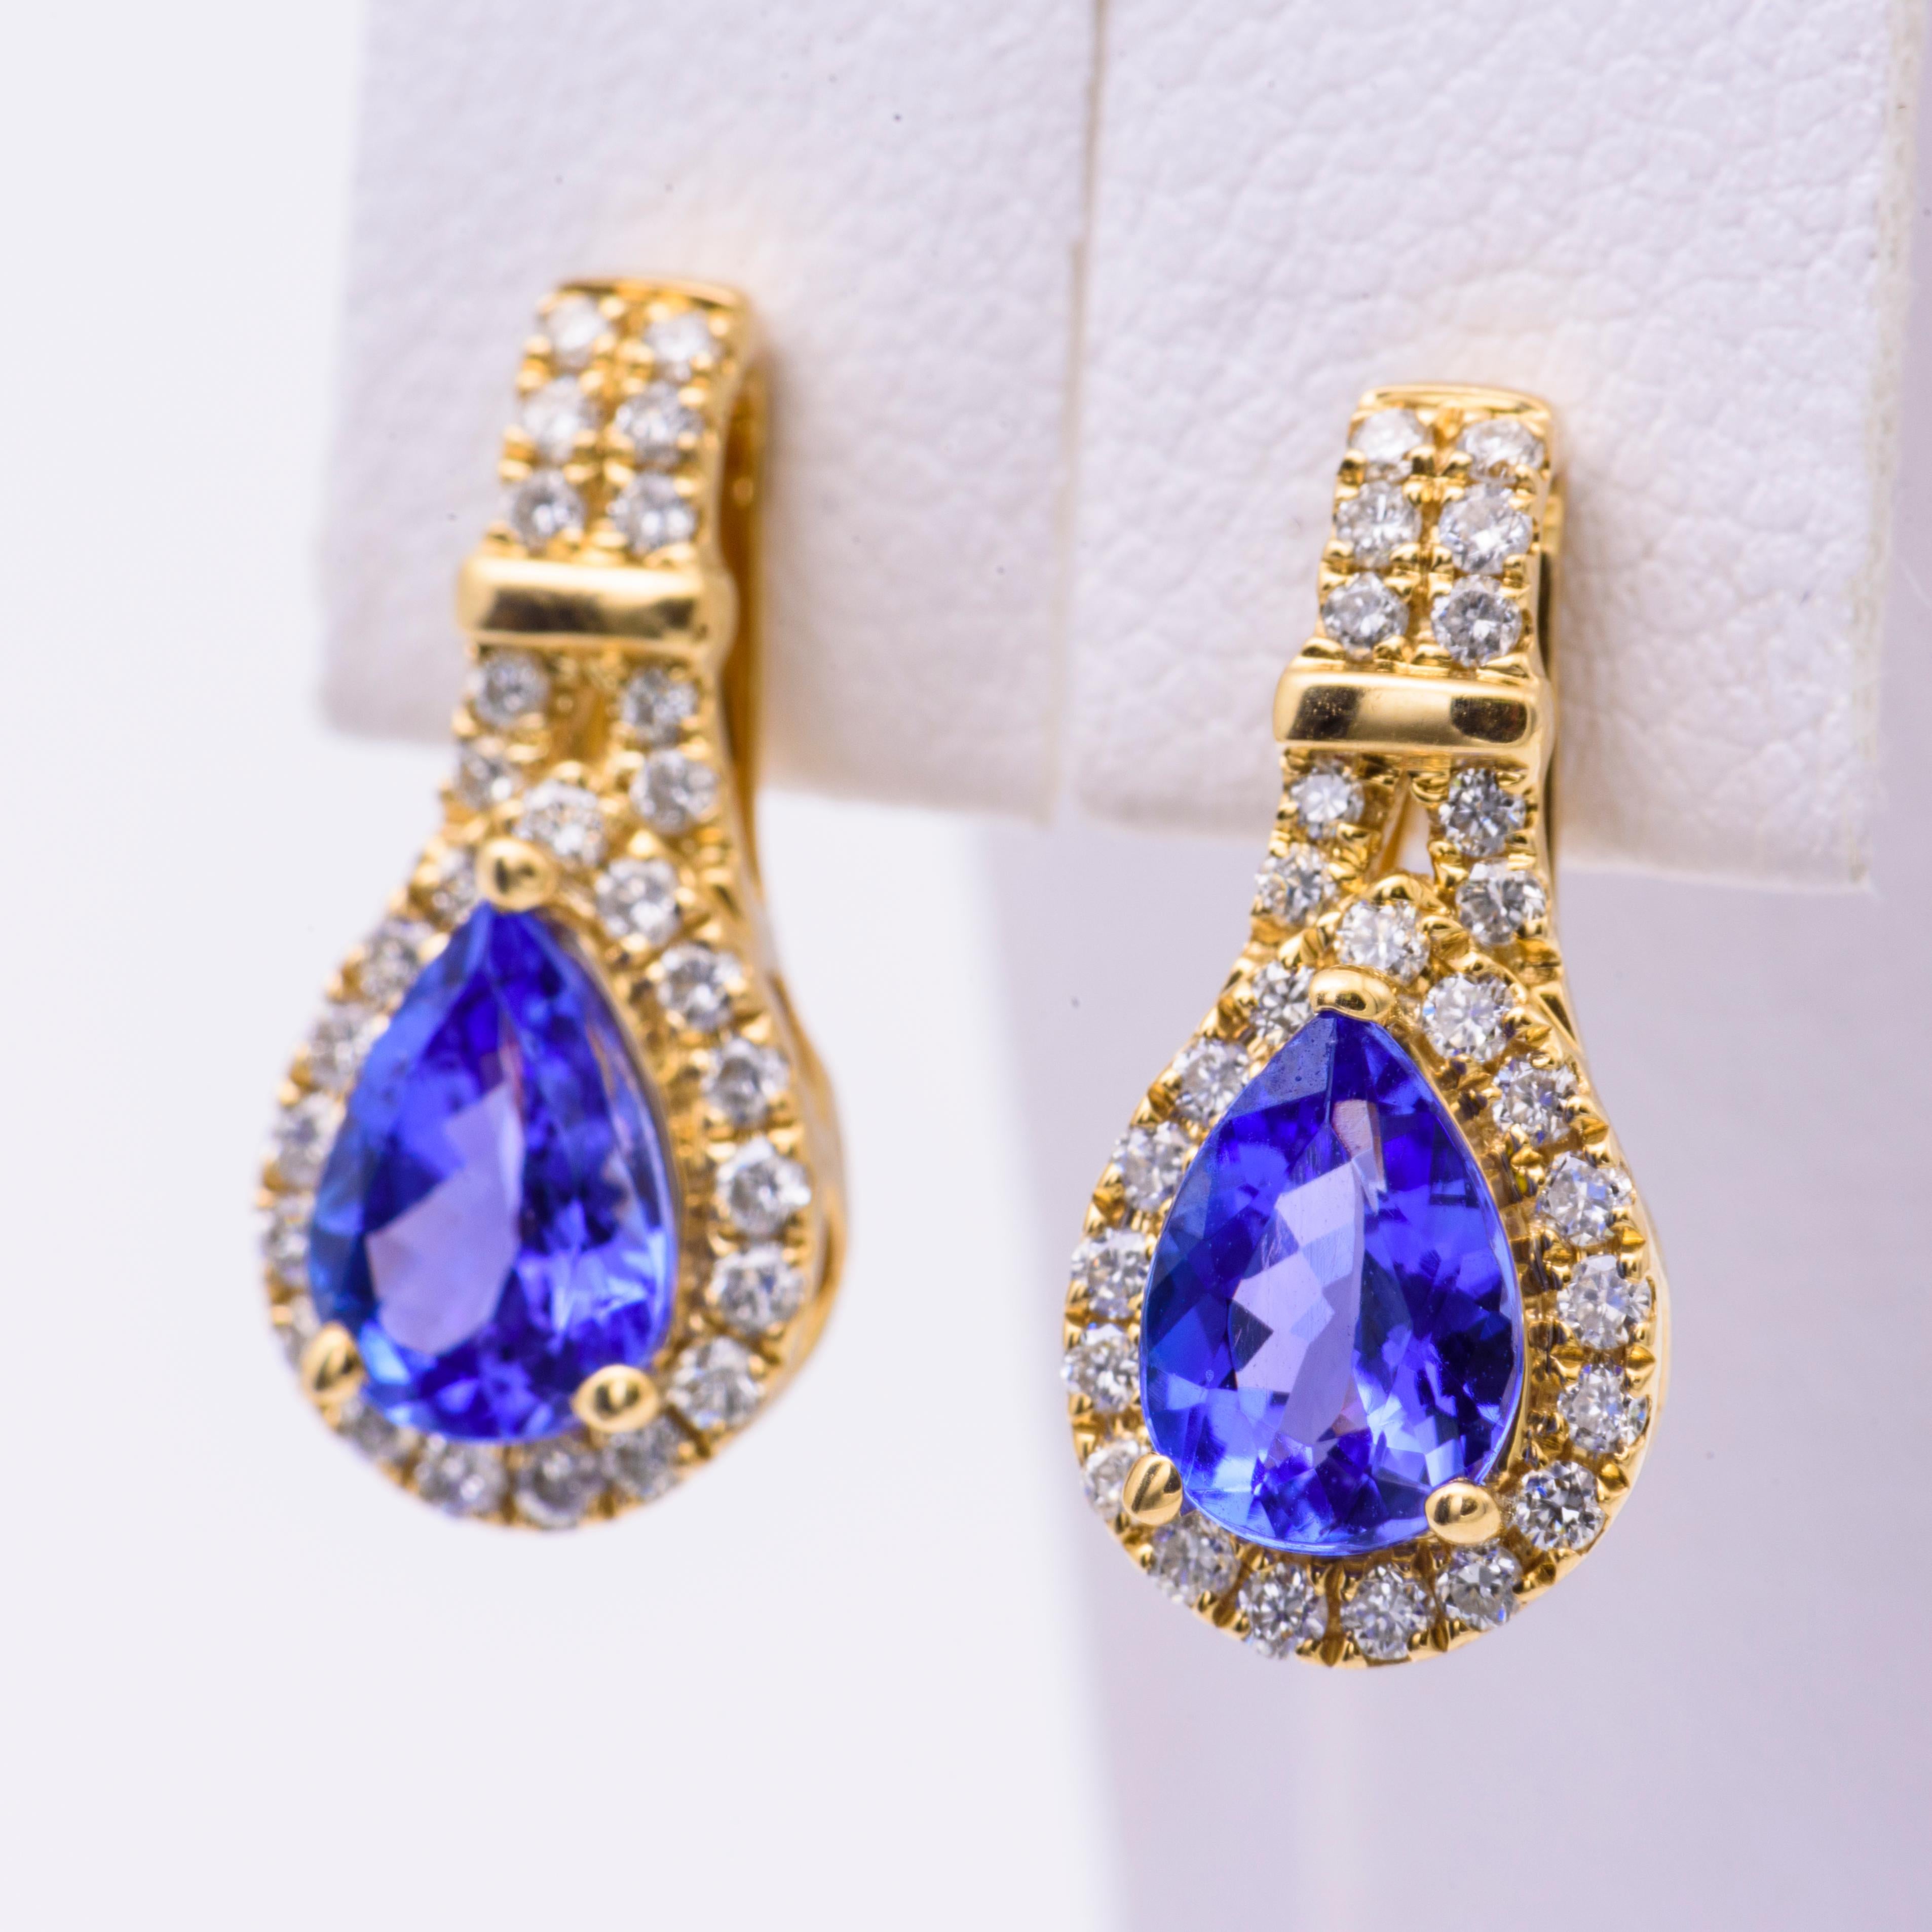 The pear shape sapphire in these earrings have a total carat weight of 1.72 carats. 
The diamonds have a total carat weight of 0.37 carats.
The earrings measures 16 mm long, they are available in white and yellow gold.
All our gemstones are genuine